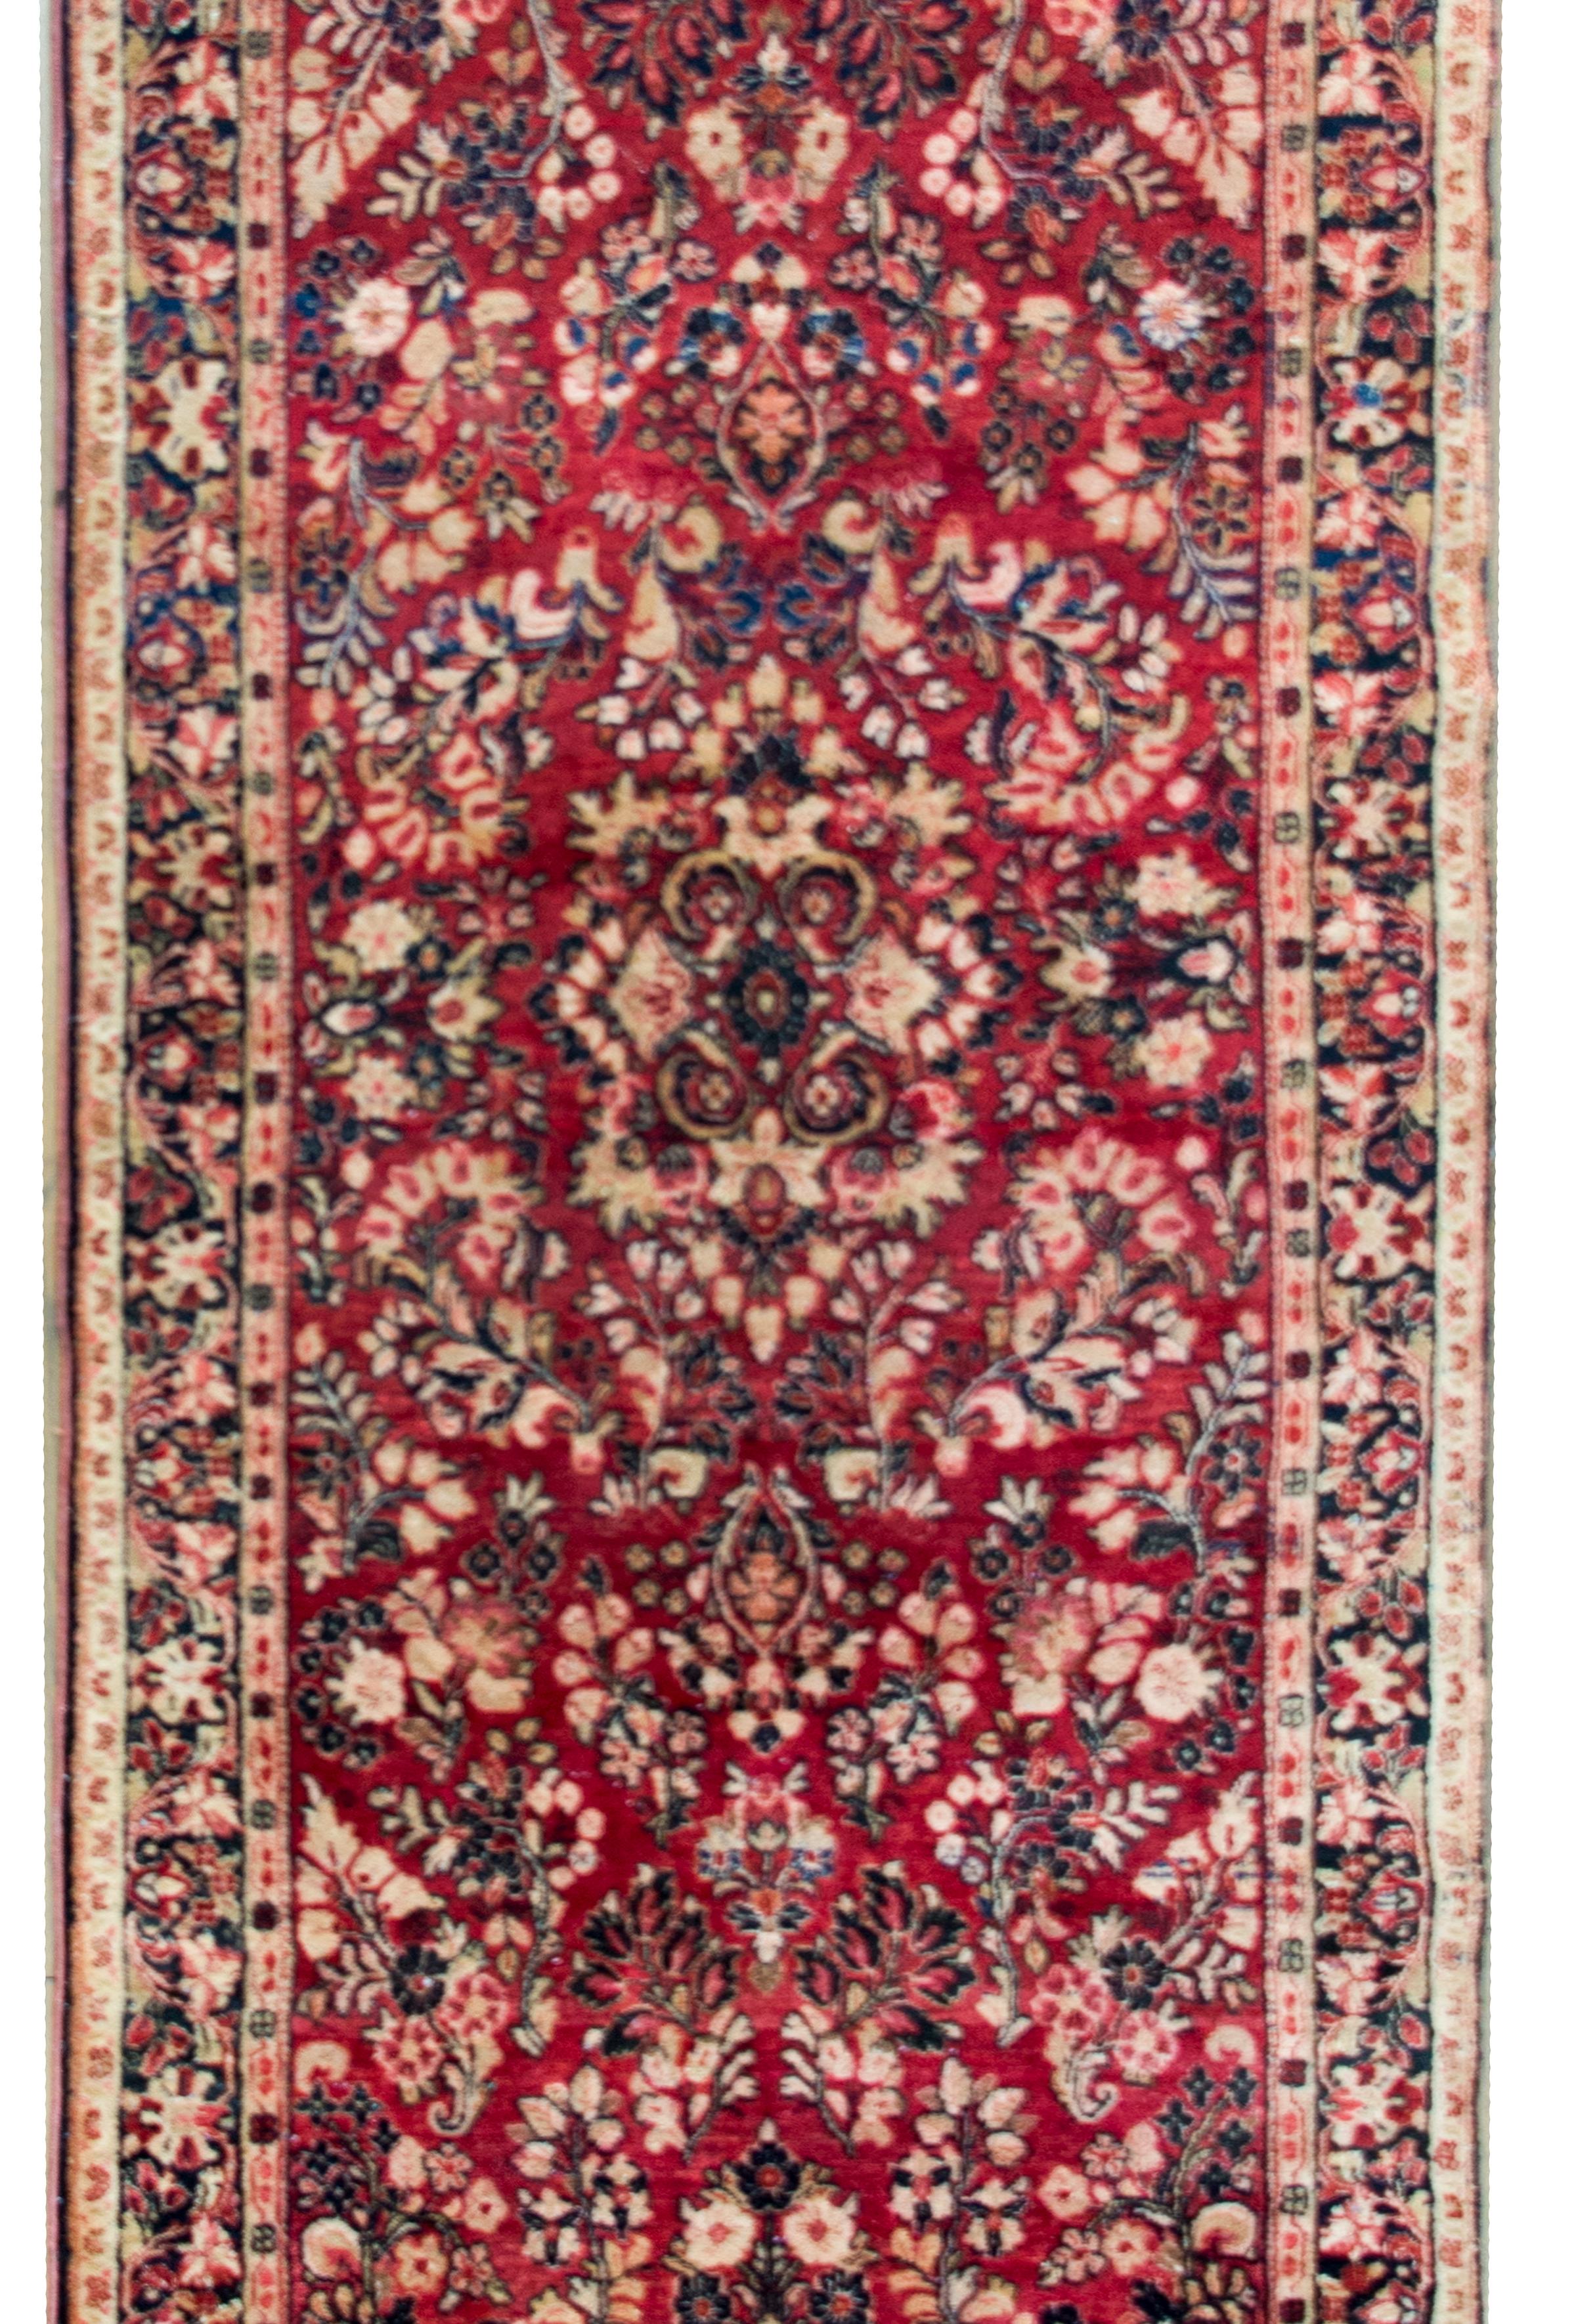 A classic early 20th century Persian Sarouk rug with an all-over mirrored pattern containing myriad floral clusters, surrounded by a complex border with a wide central floral patterned stripe flanked by a pair of petite floral patterned stripes, and